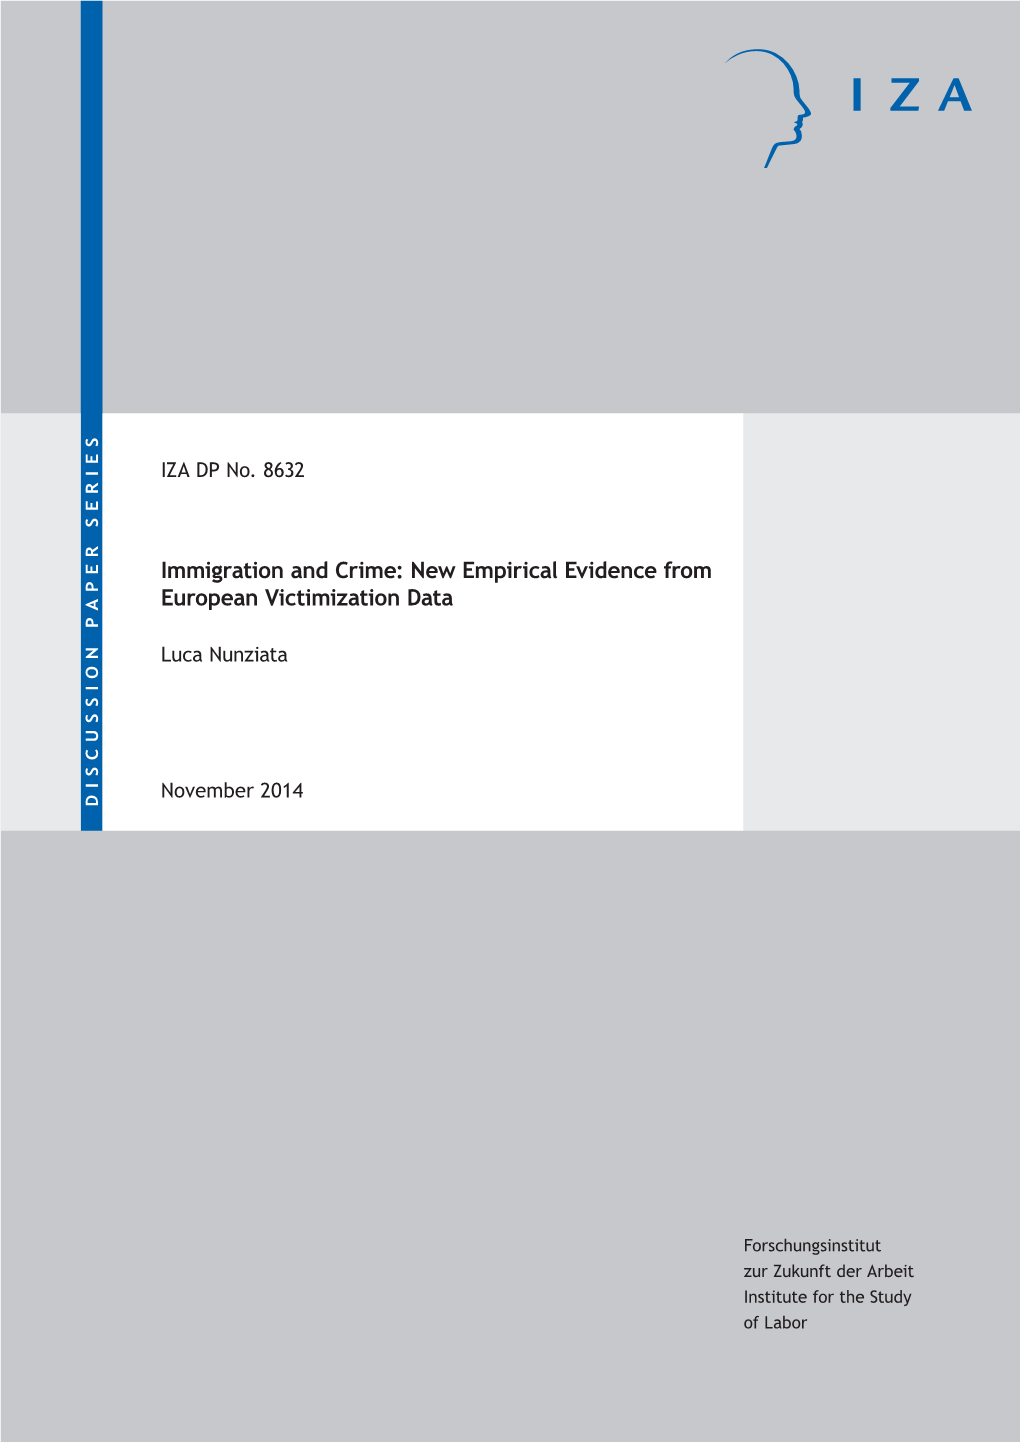 Immigration and Crime: New Empirical Evidence from European Victimization Data